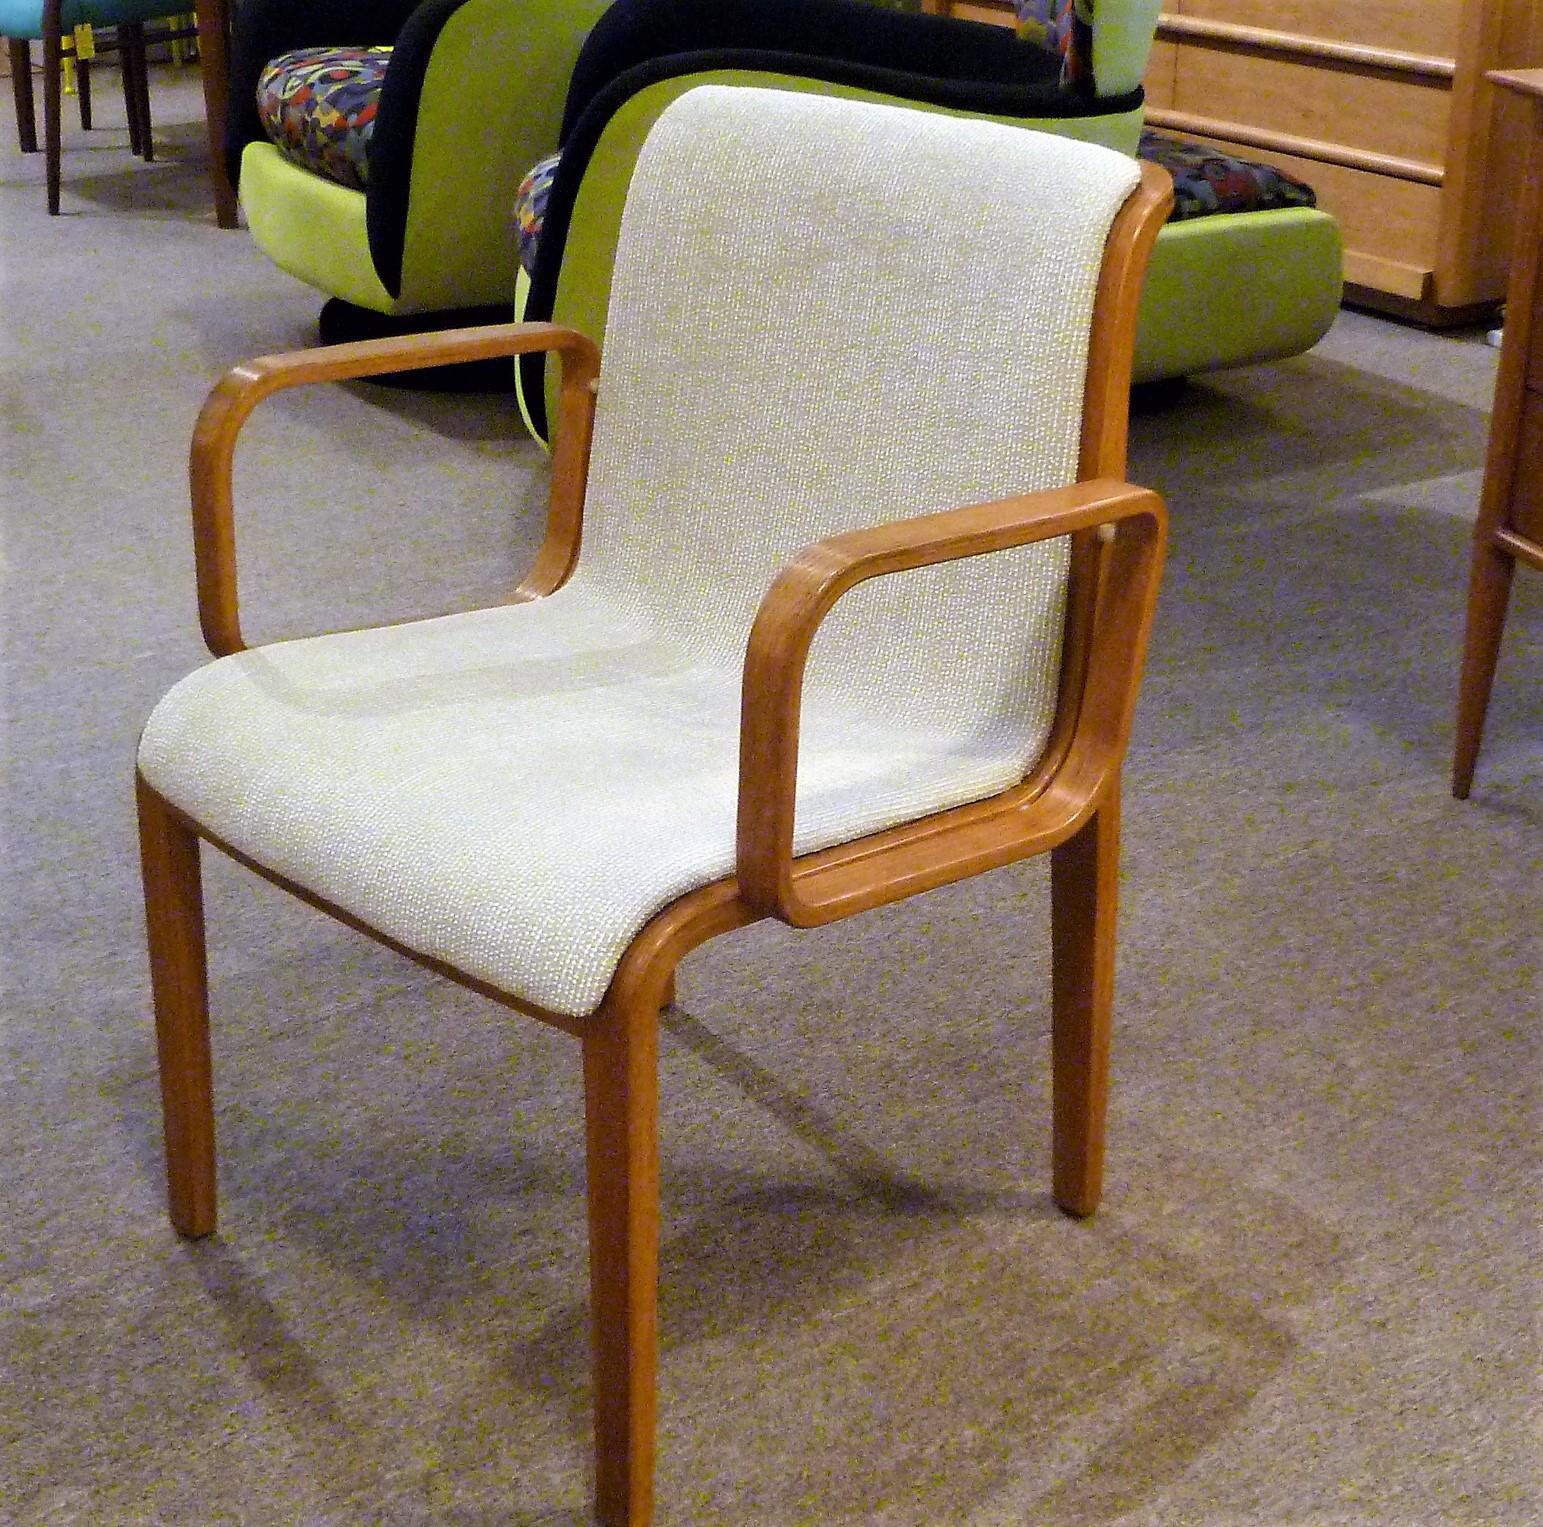 REDUCED FROM $750....Bill Stephens worked on the design of the Stephens chair from 1965-1967 for the Yale School of Architecture and was produced by Knoll International. The 1300 Series consists of a frame of laminated wood, oak in this case, and a